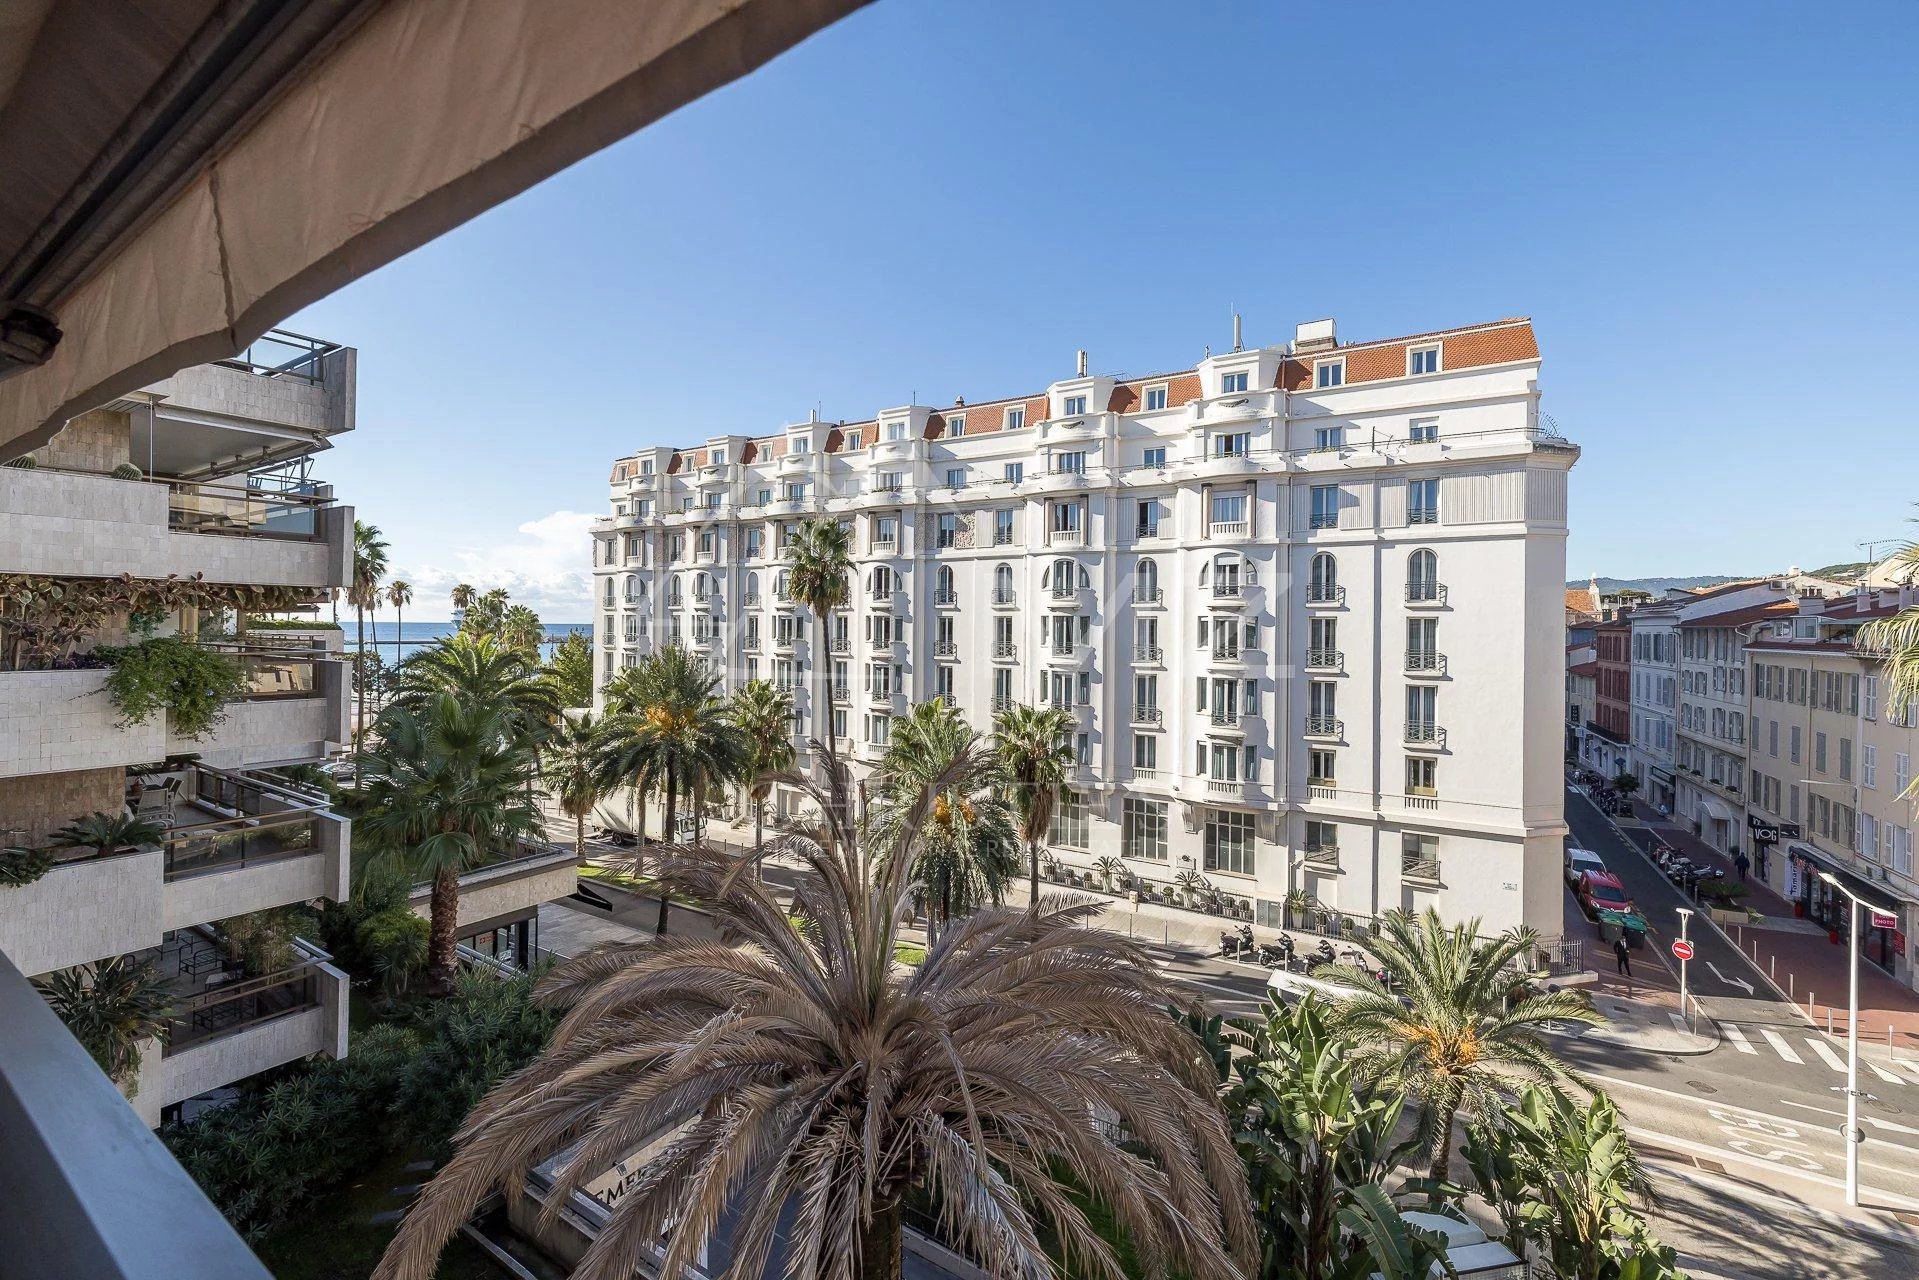 Cannes Gray d'Albion - Two bedroom apartment